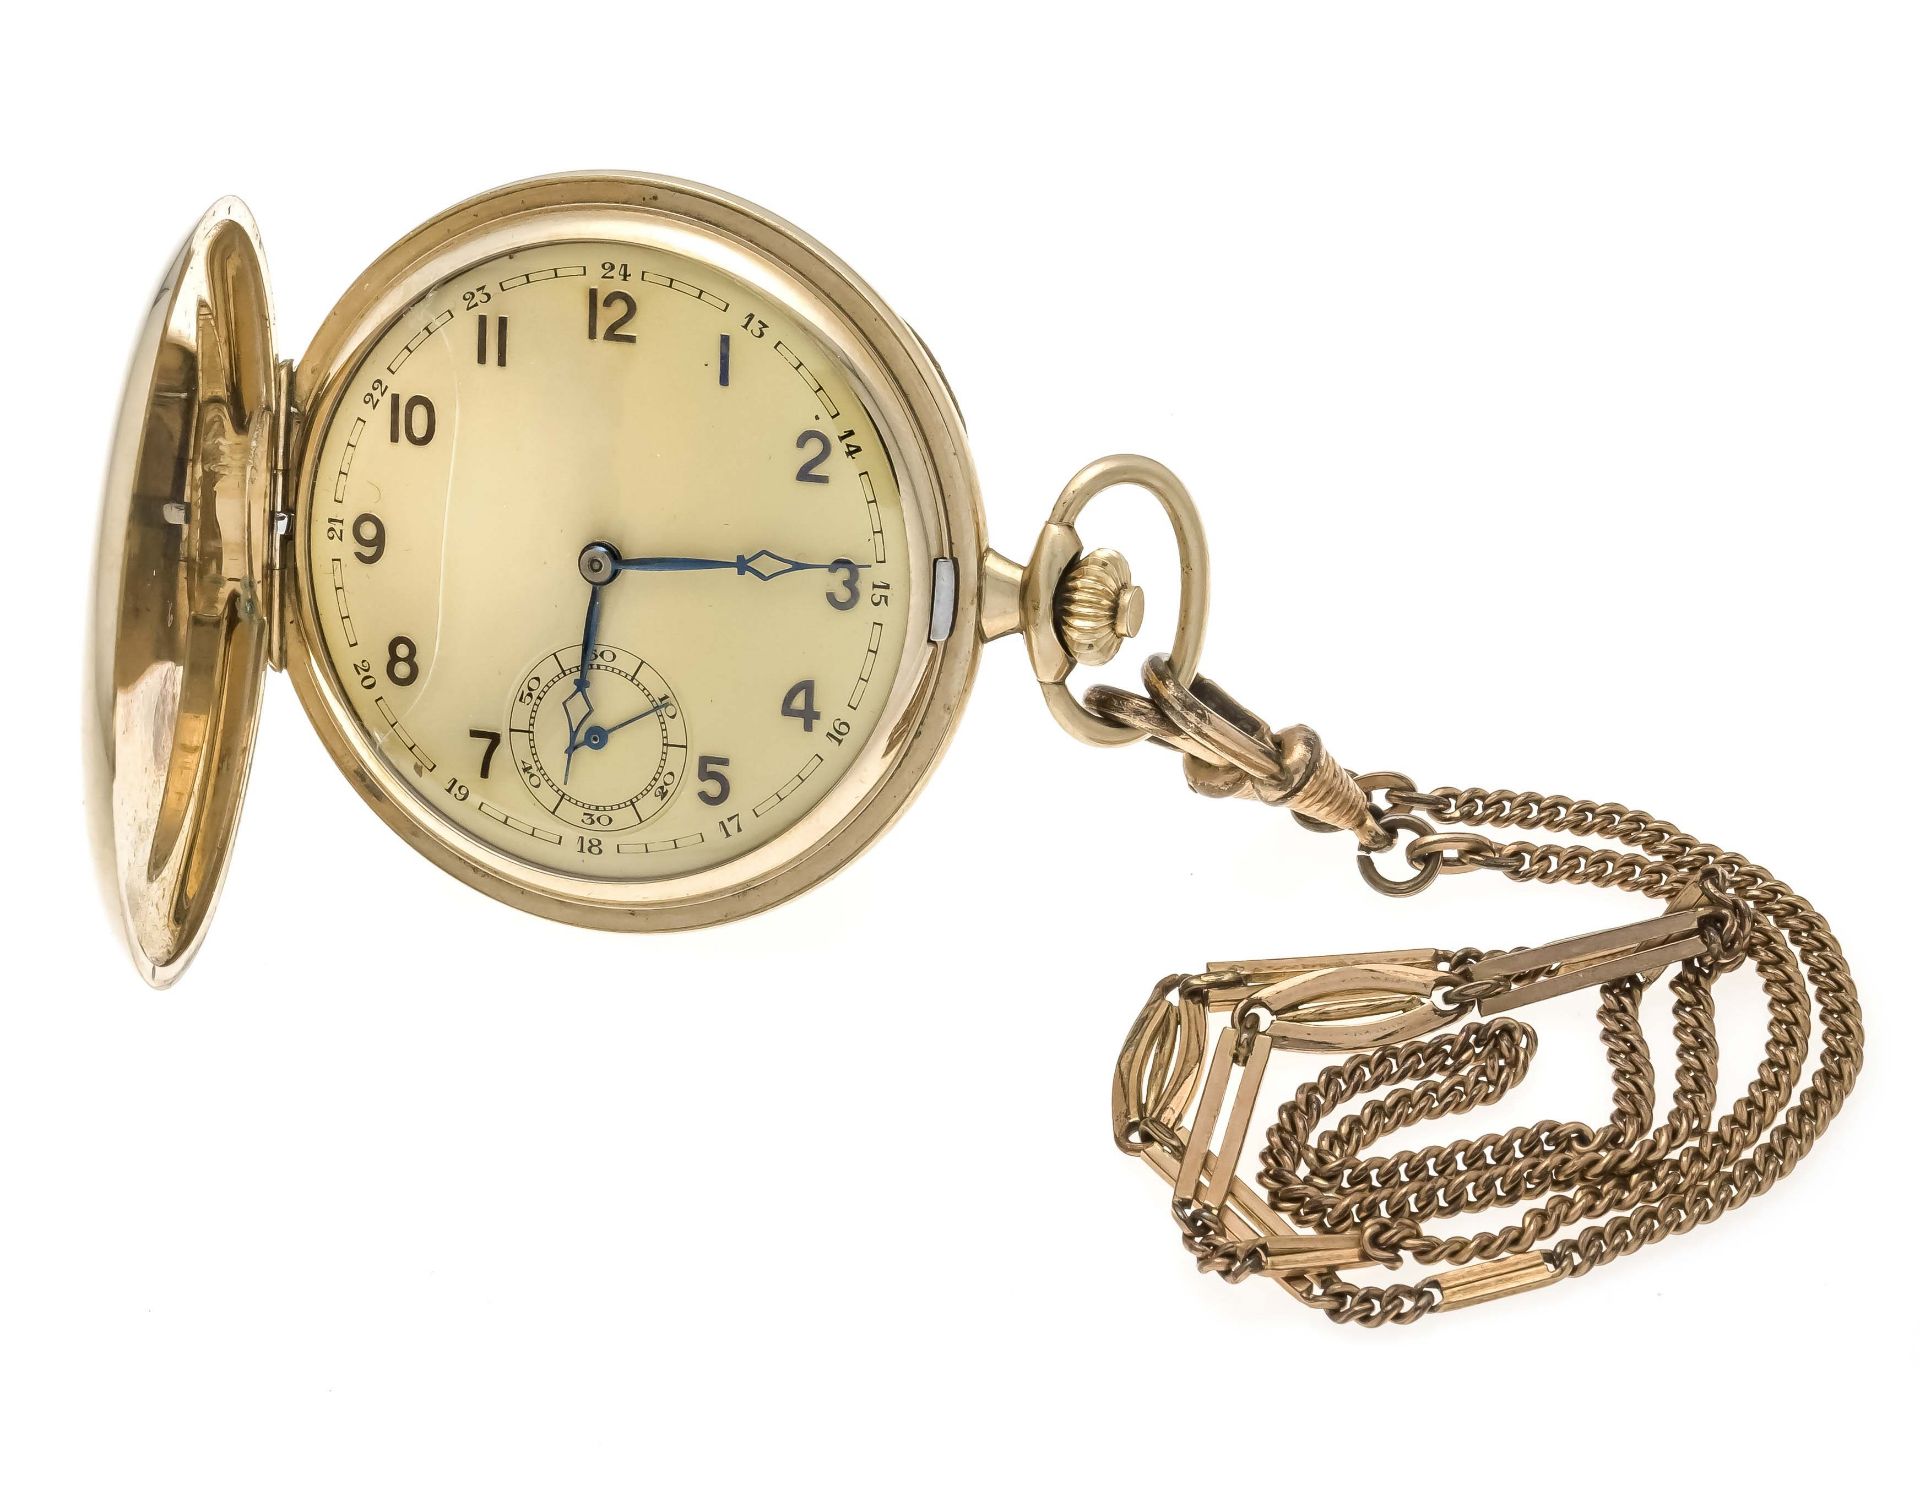 A gentleman's spring-cap pocket watch, Walz Gold double`, polished case, inside marked RW for Robert